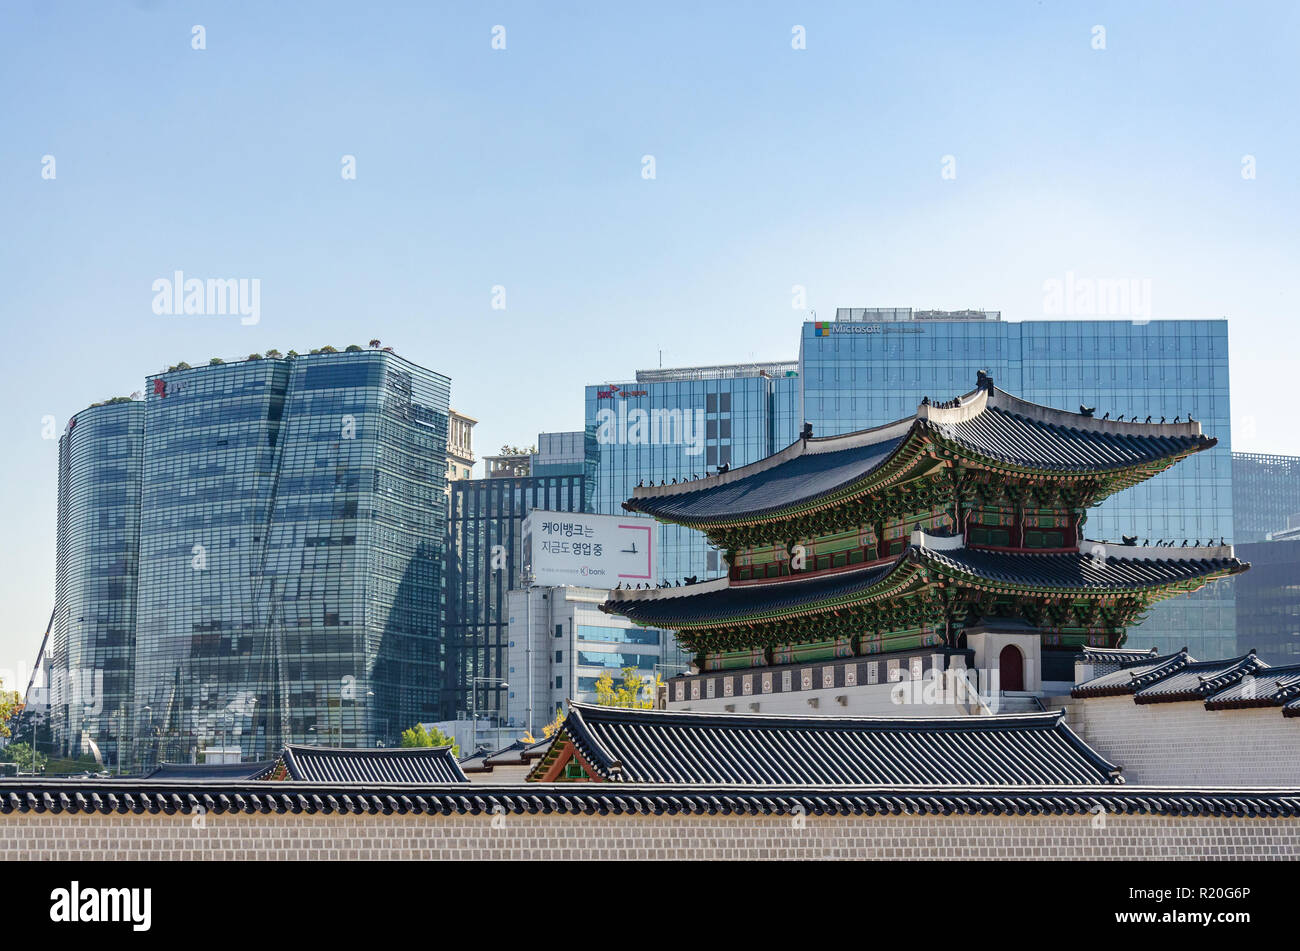 The juxtaposition of the old Gyeongbokgung Palace palace set against the backdrop of modern, tall office blocks in Seoul, South Korea. Stock Photo